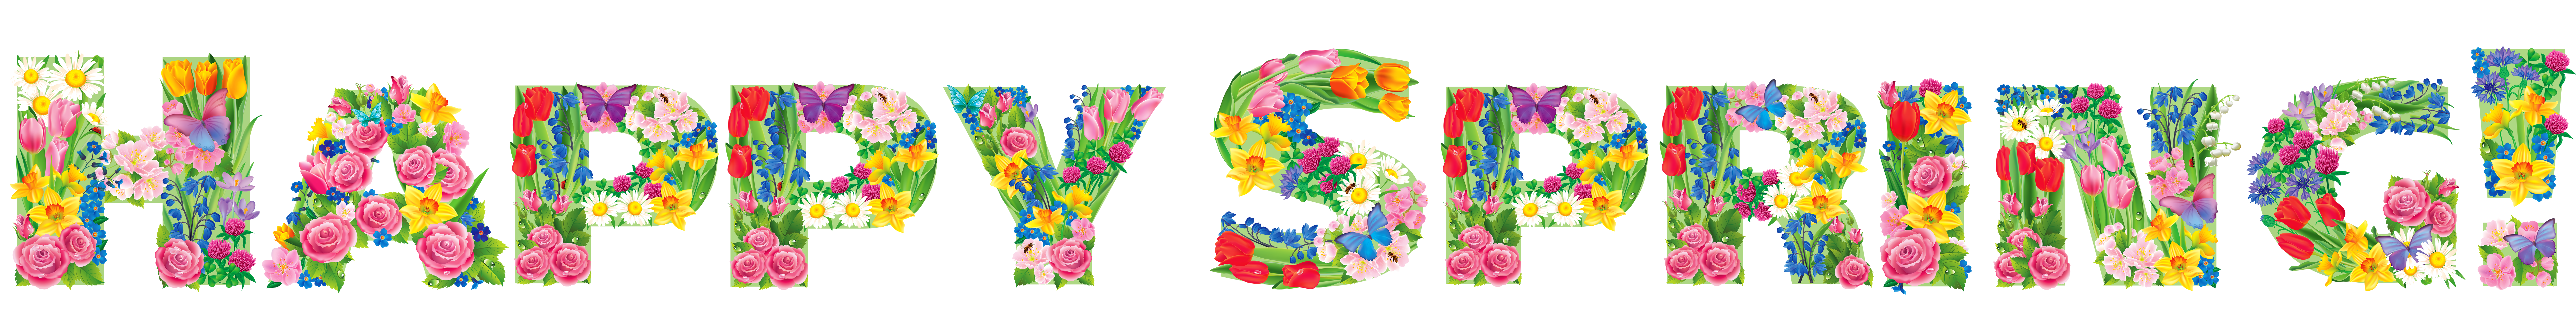 spring clip art banners - photo #19